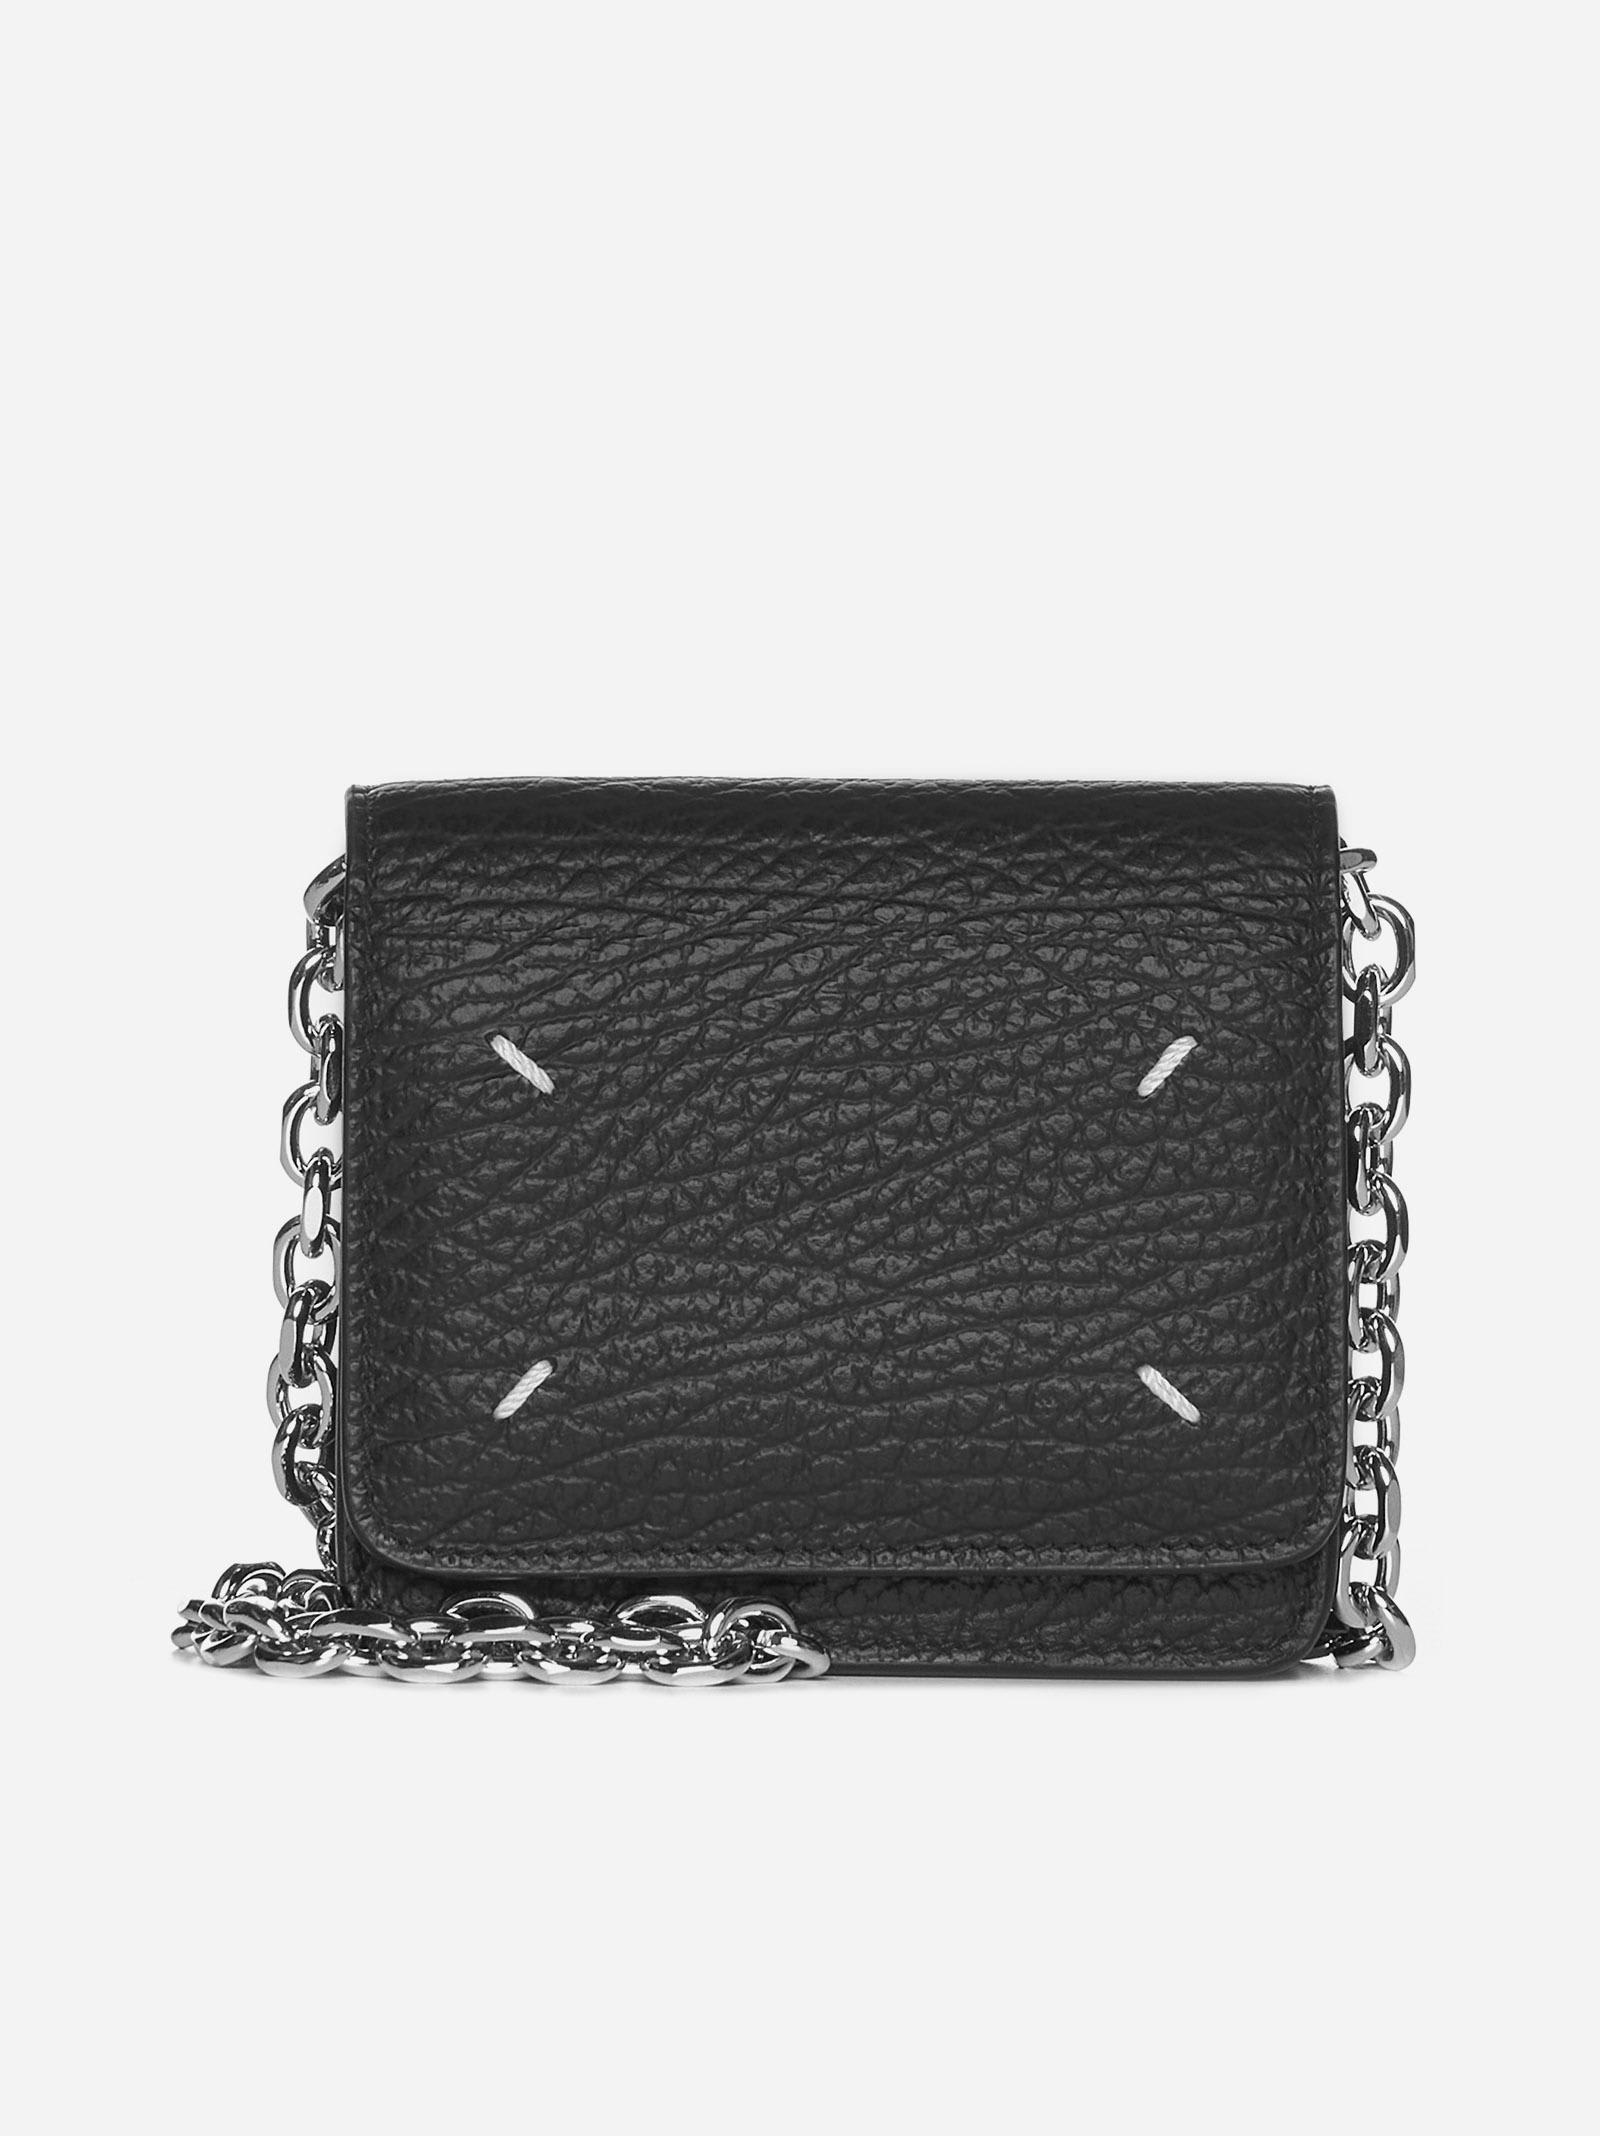 MAISON MARGIELA SMALL LEATHER CHAIN WALLET BAG